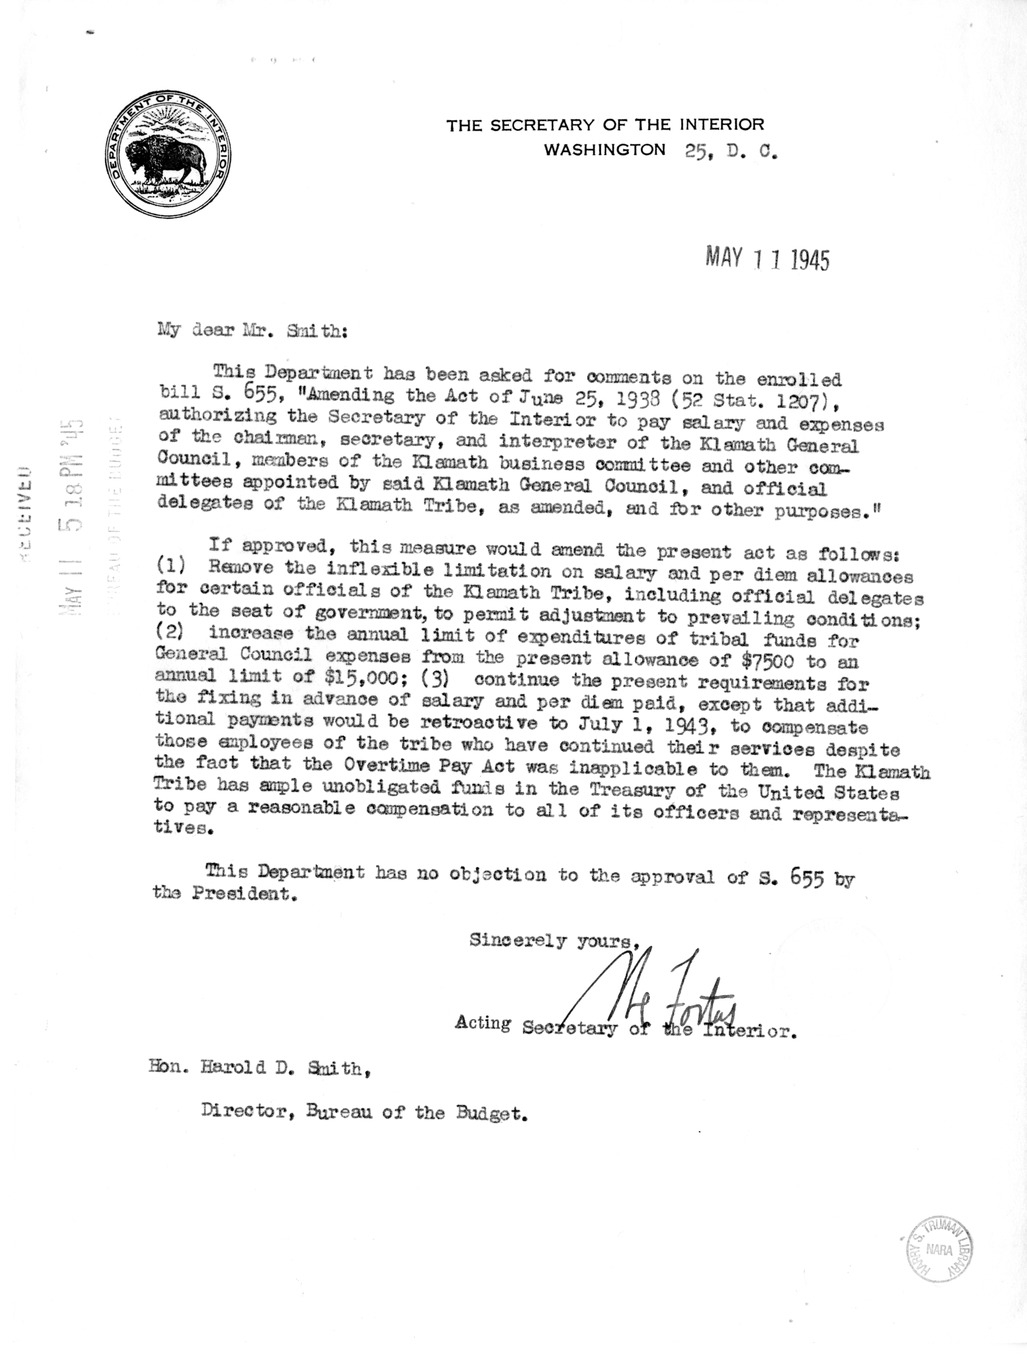 Memorandum from Frederick J. Bailey to M. C. Latta, S. 655, Amending the Act of June 25, 1938 (52 Stat. 1207) Authorizing the Secretary of the Interior to Pay Salary and Expenses of the Chairman, Secretary, and Interpreter of the Klamath General Council, 